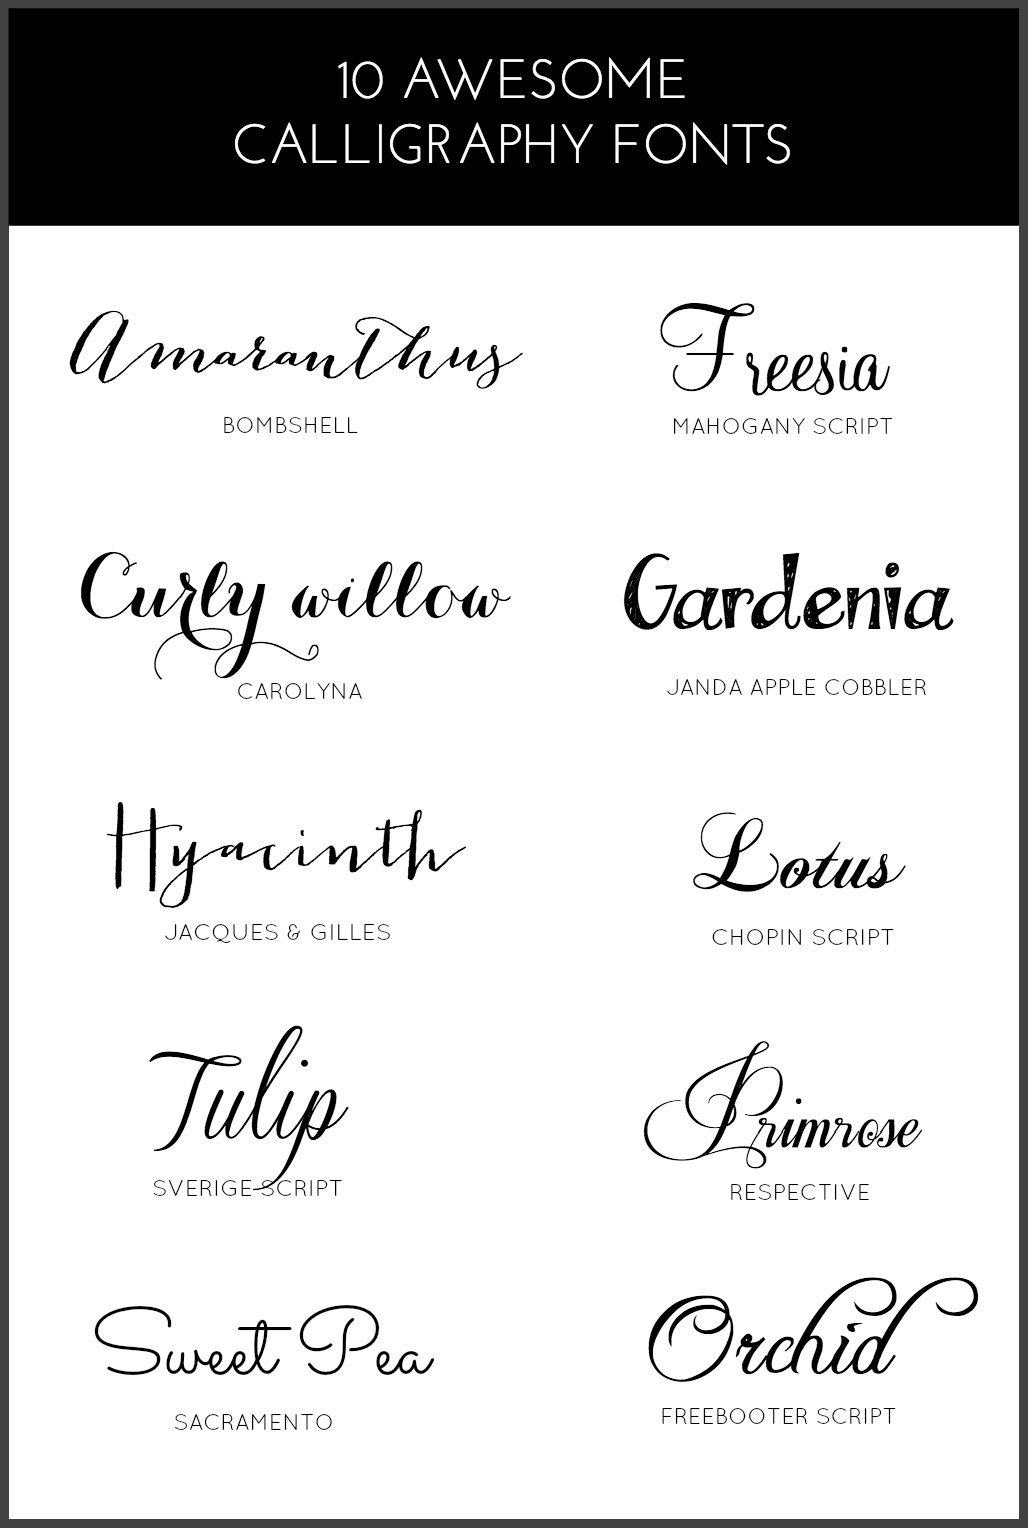 10 AWESOME CALLIGRAPHY FONTS | PINKPOT